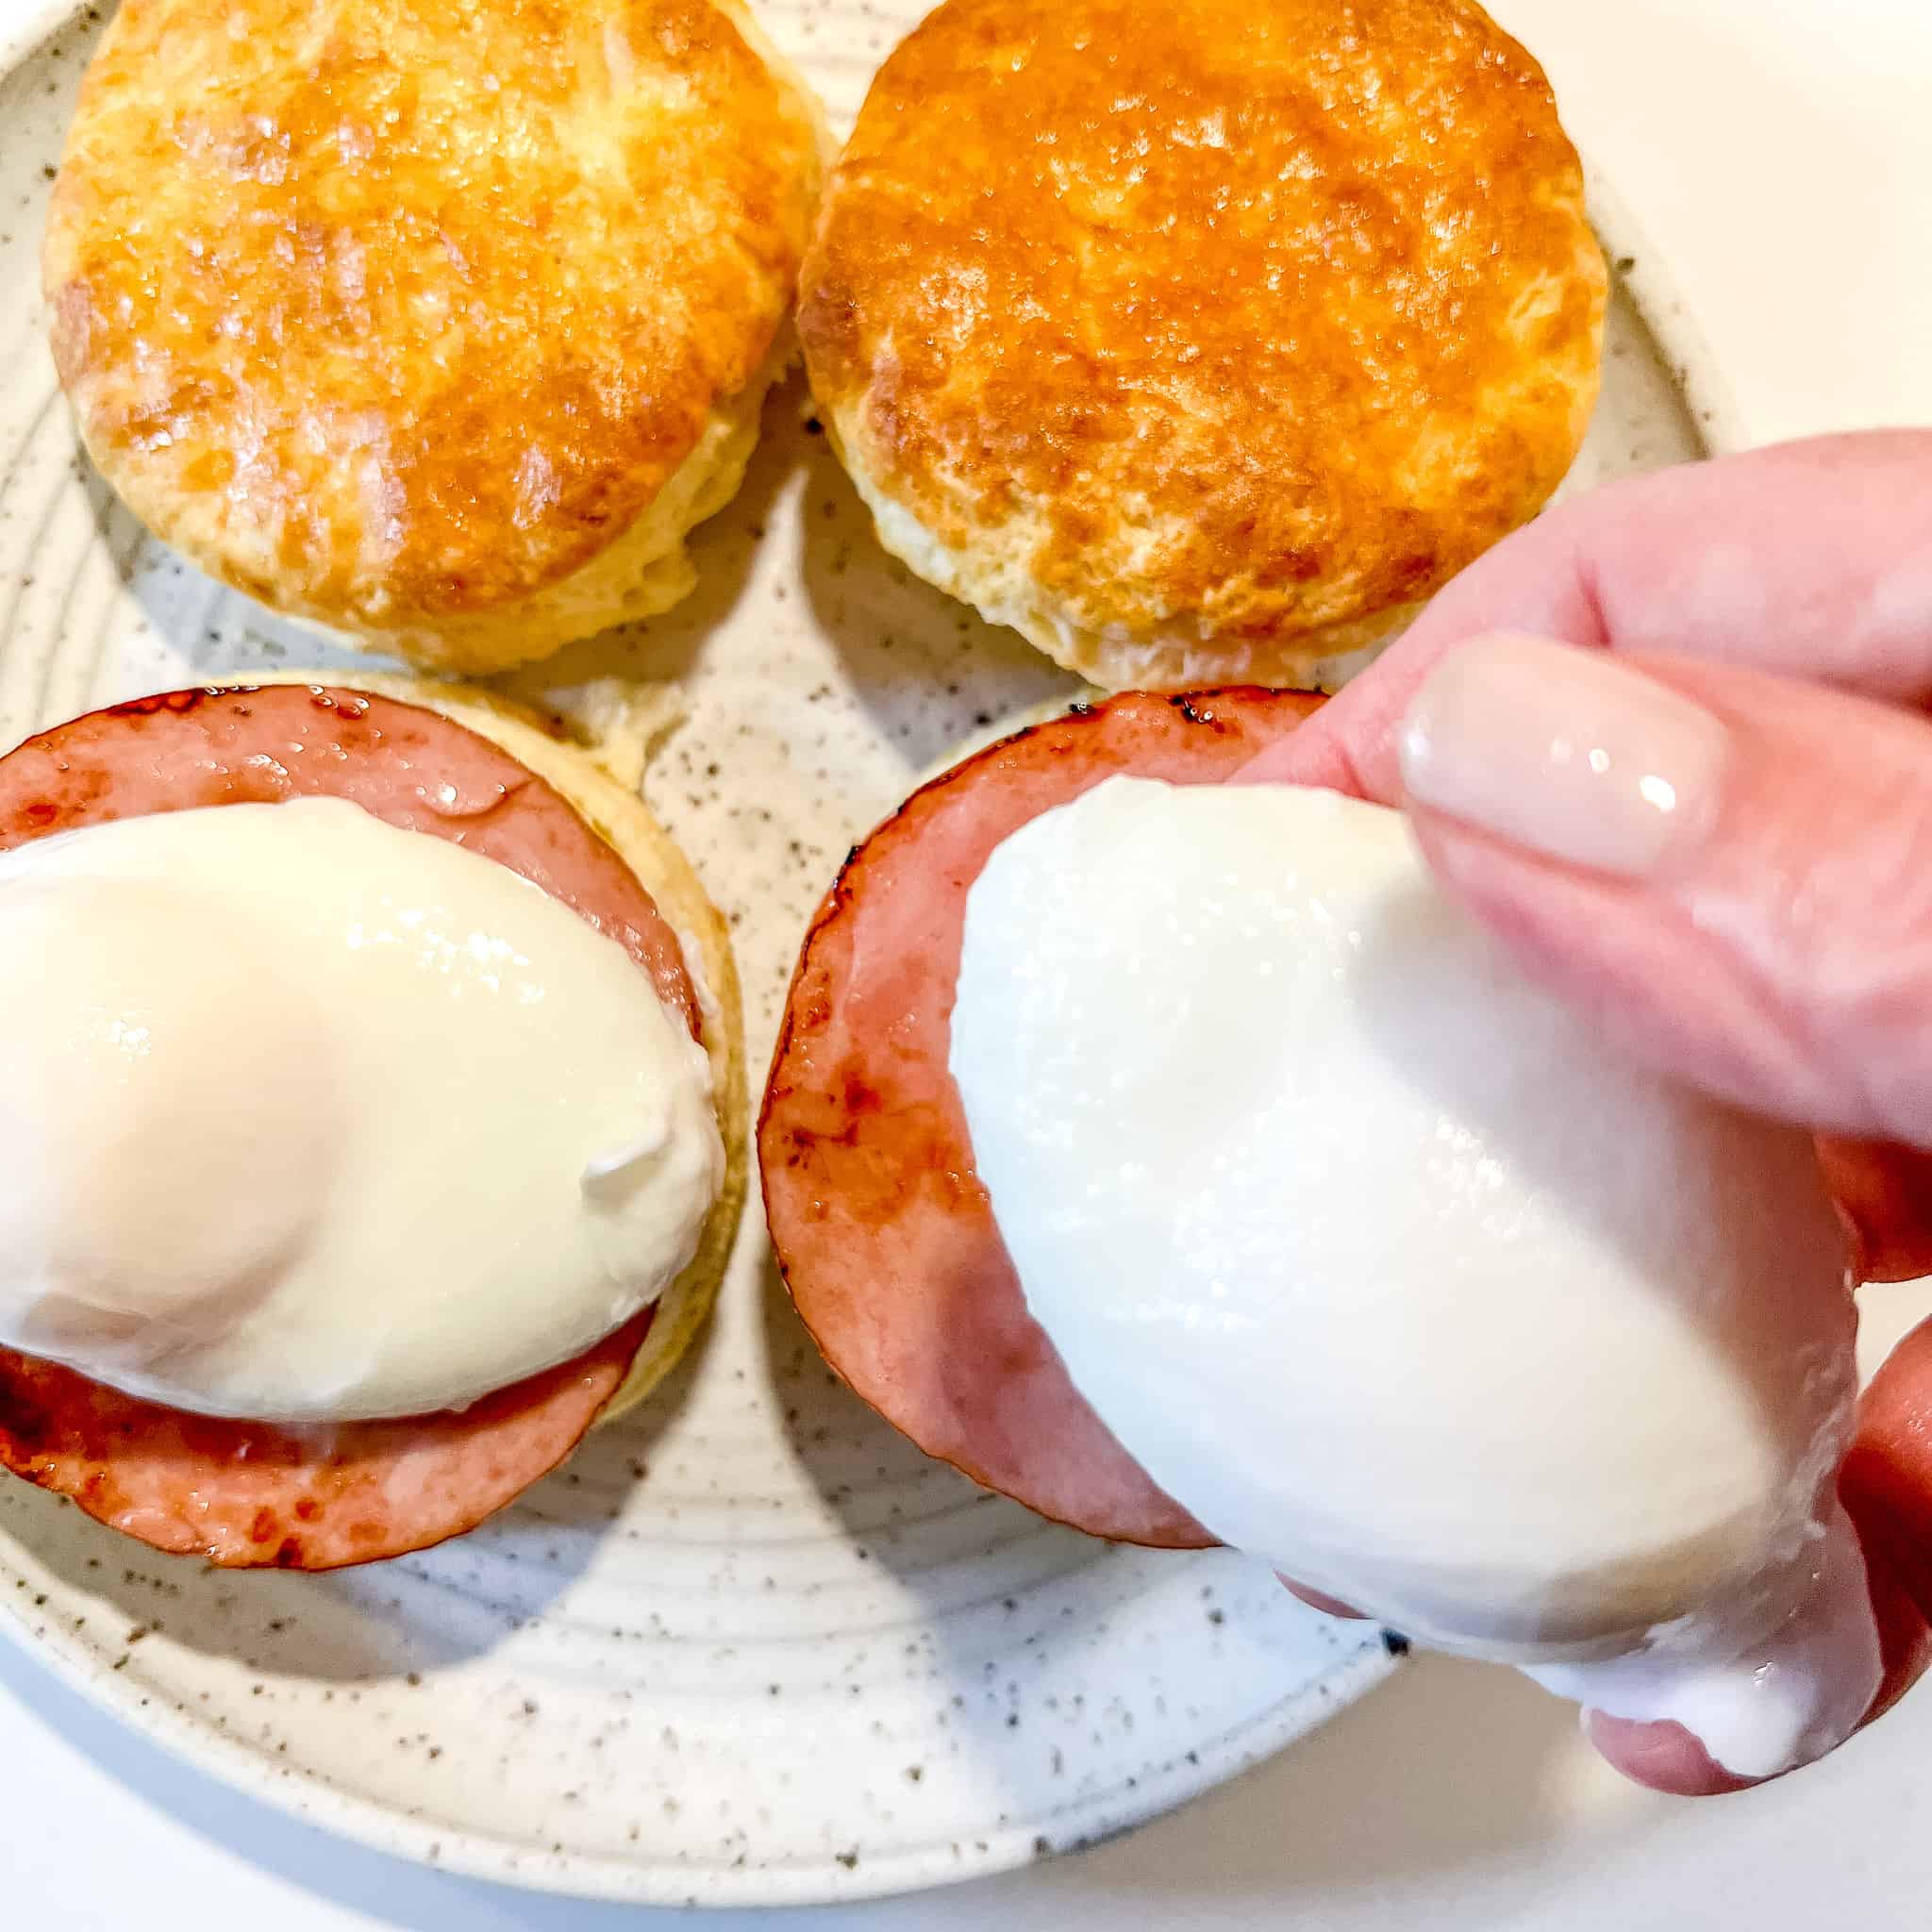 placing a poached egg on top of a biscuit with canadian bacon.